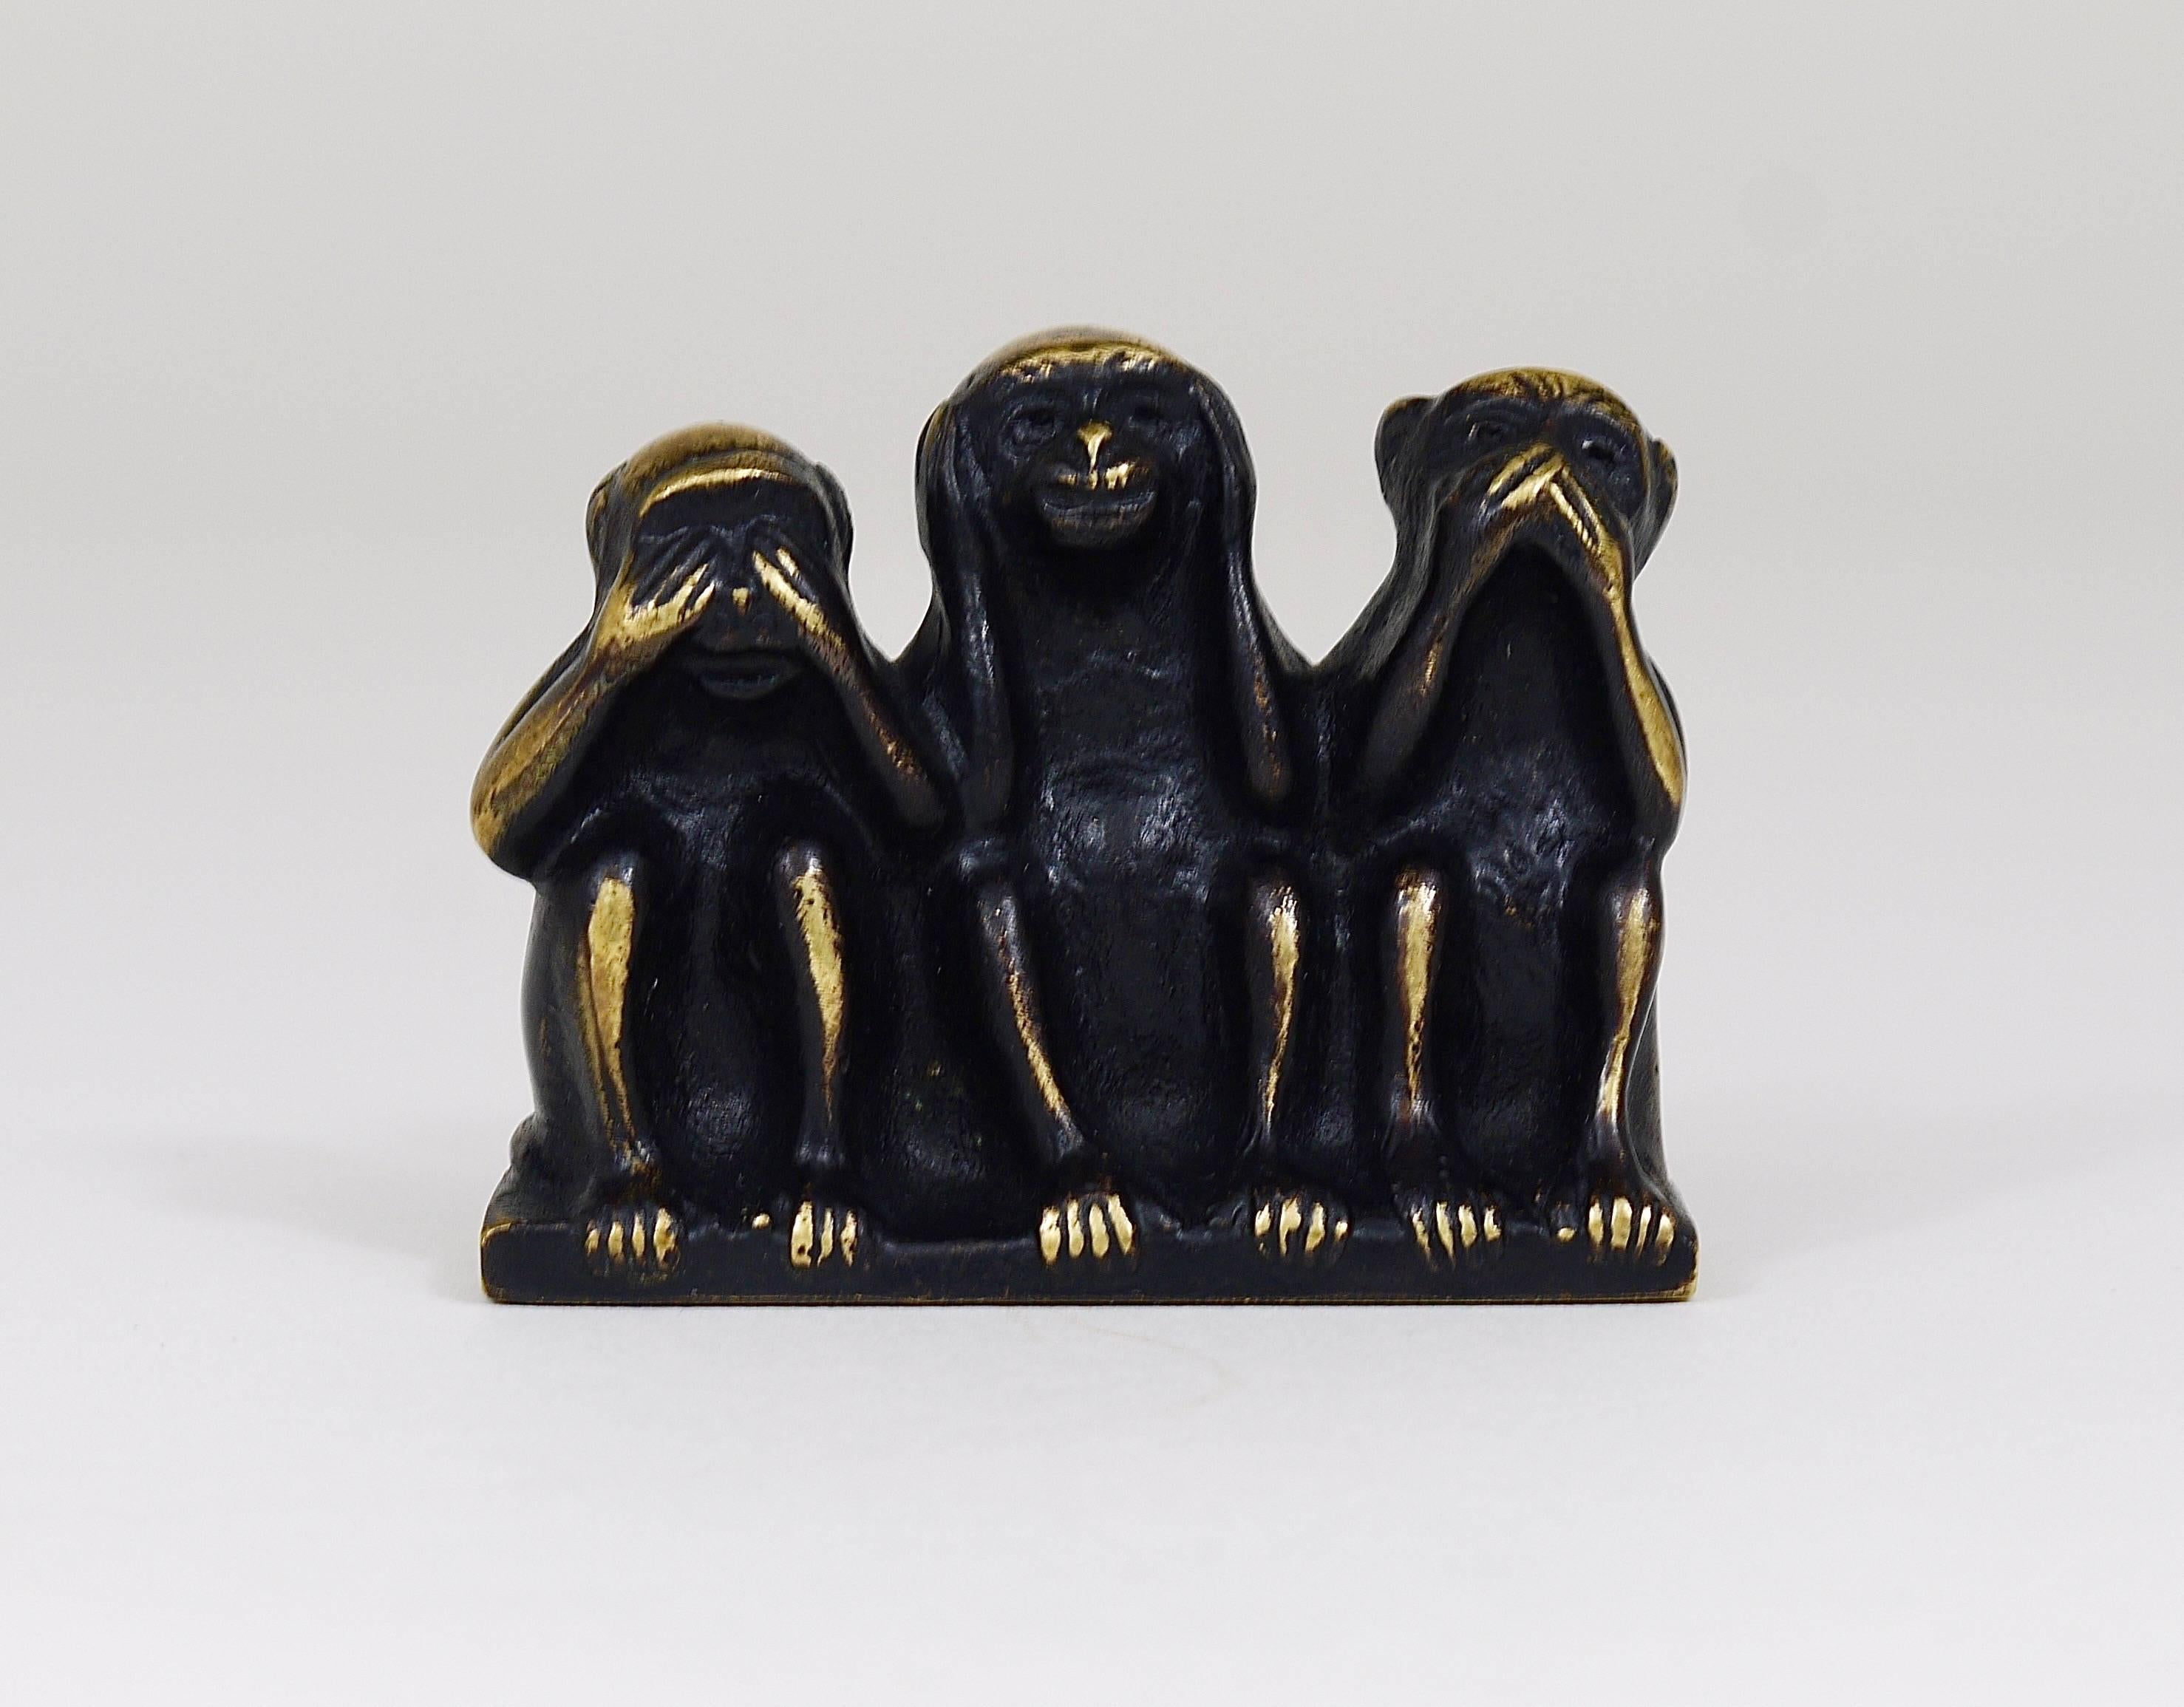 A lovely sculpture, displaying three monkeys, made of brass, from the 1950s. Designed by Walter Bosse, executed by Hertha Baller in Austria. In very good condition. We offer other Walter Bosse brass objects in our other listings.

Speak no evil,